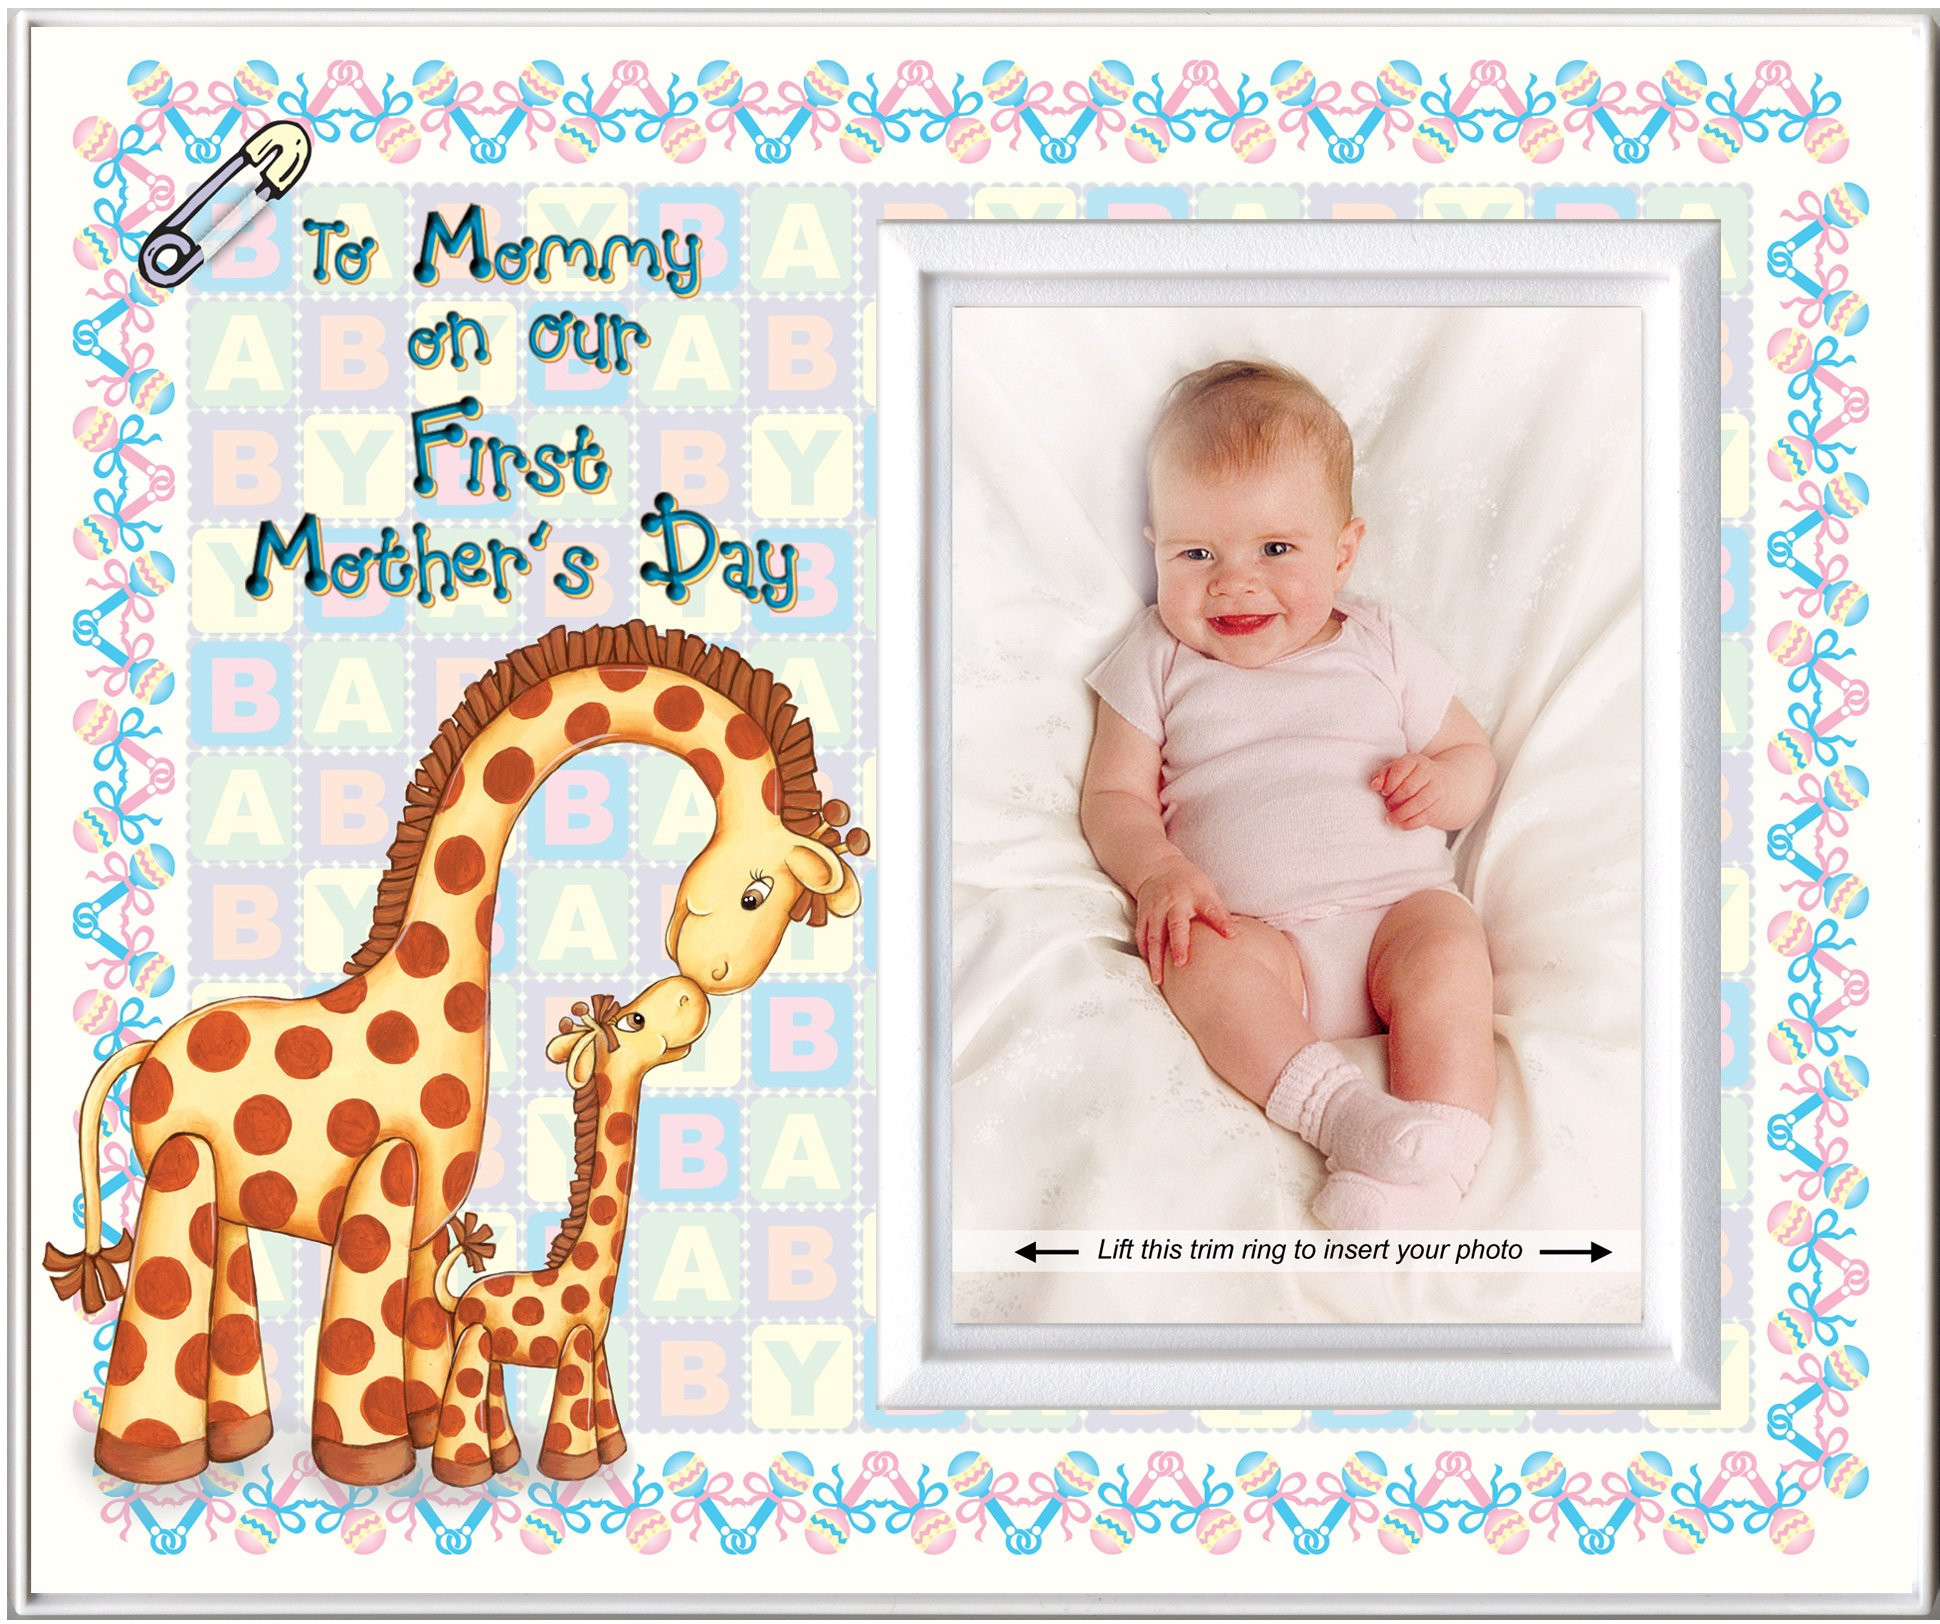 First Mothers Day Gifts
 Amazon First Mother s Day Gift for Grandmother From